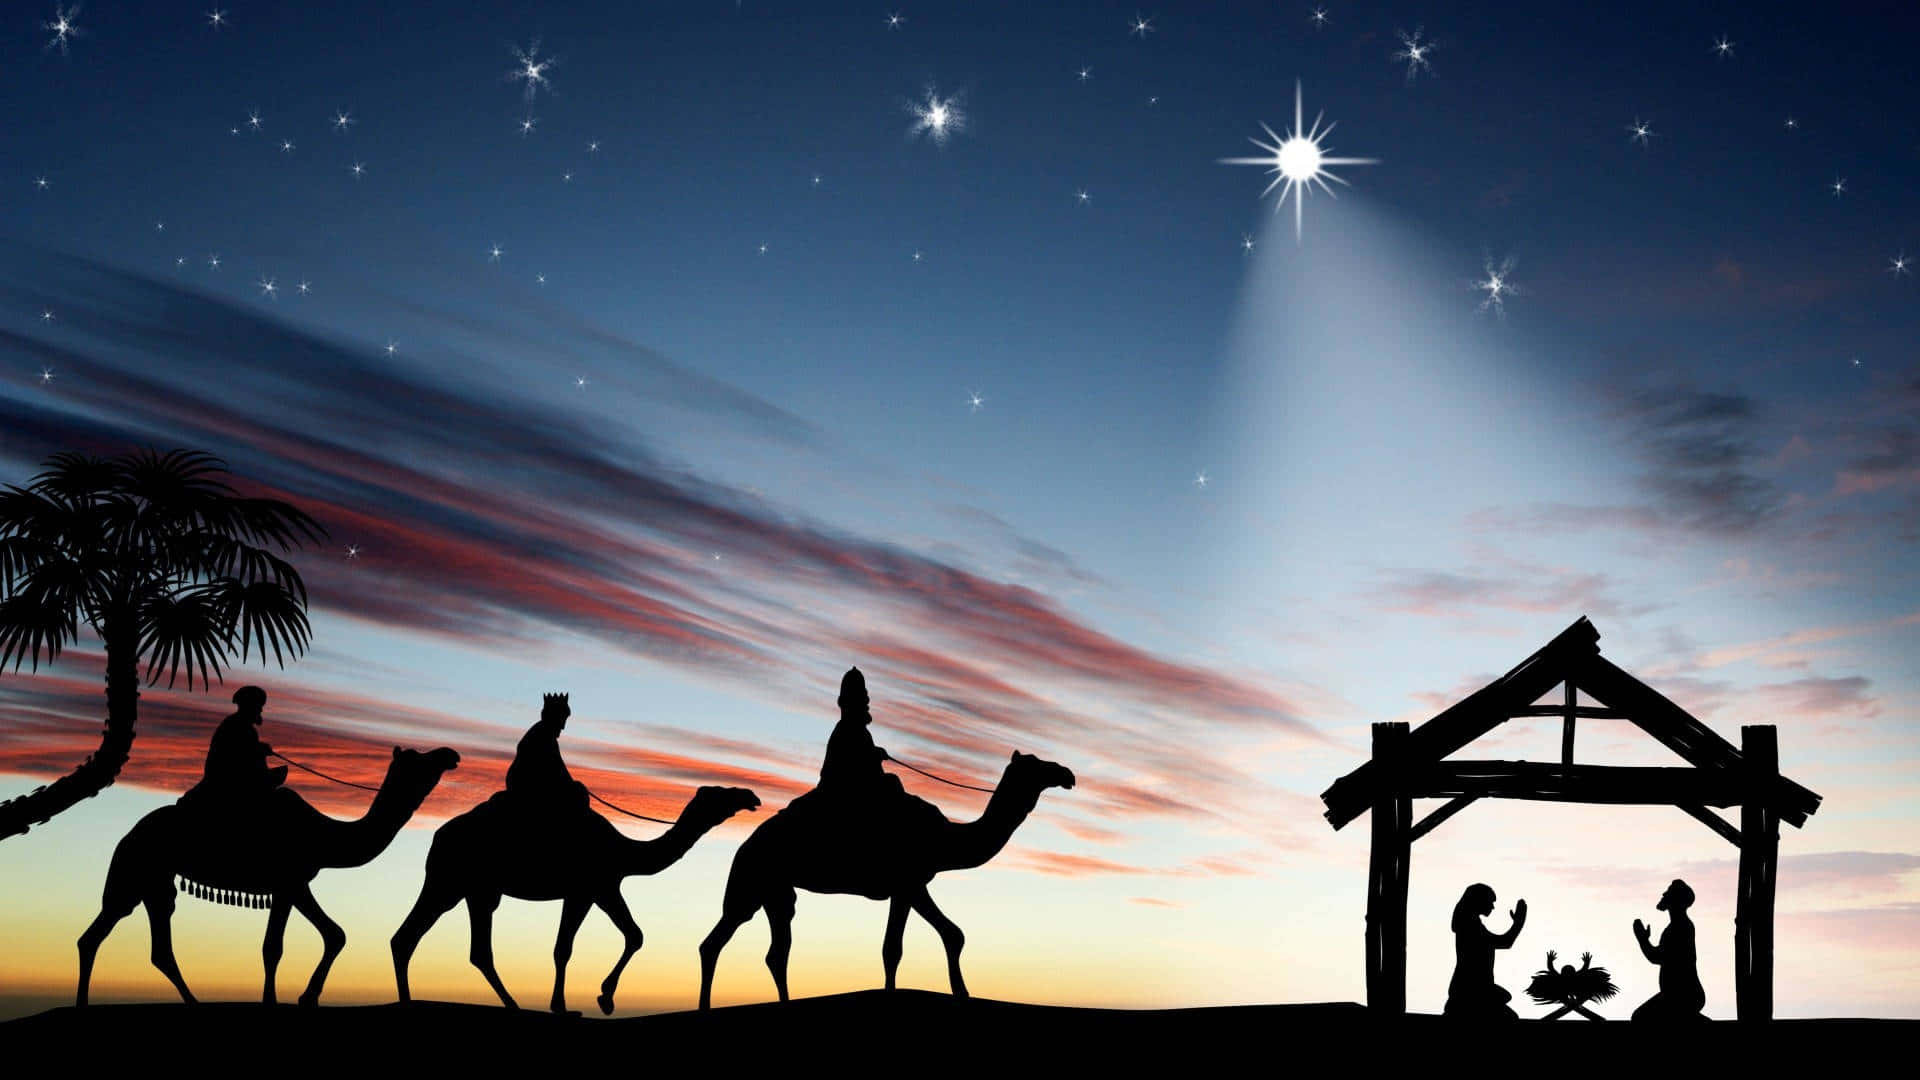 A Nativity Scene With Three Camels And A Star